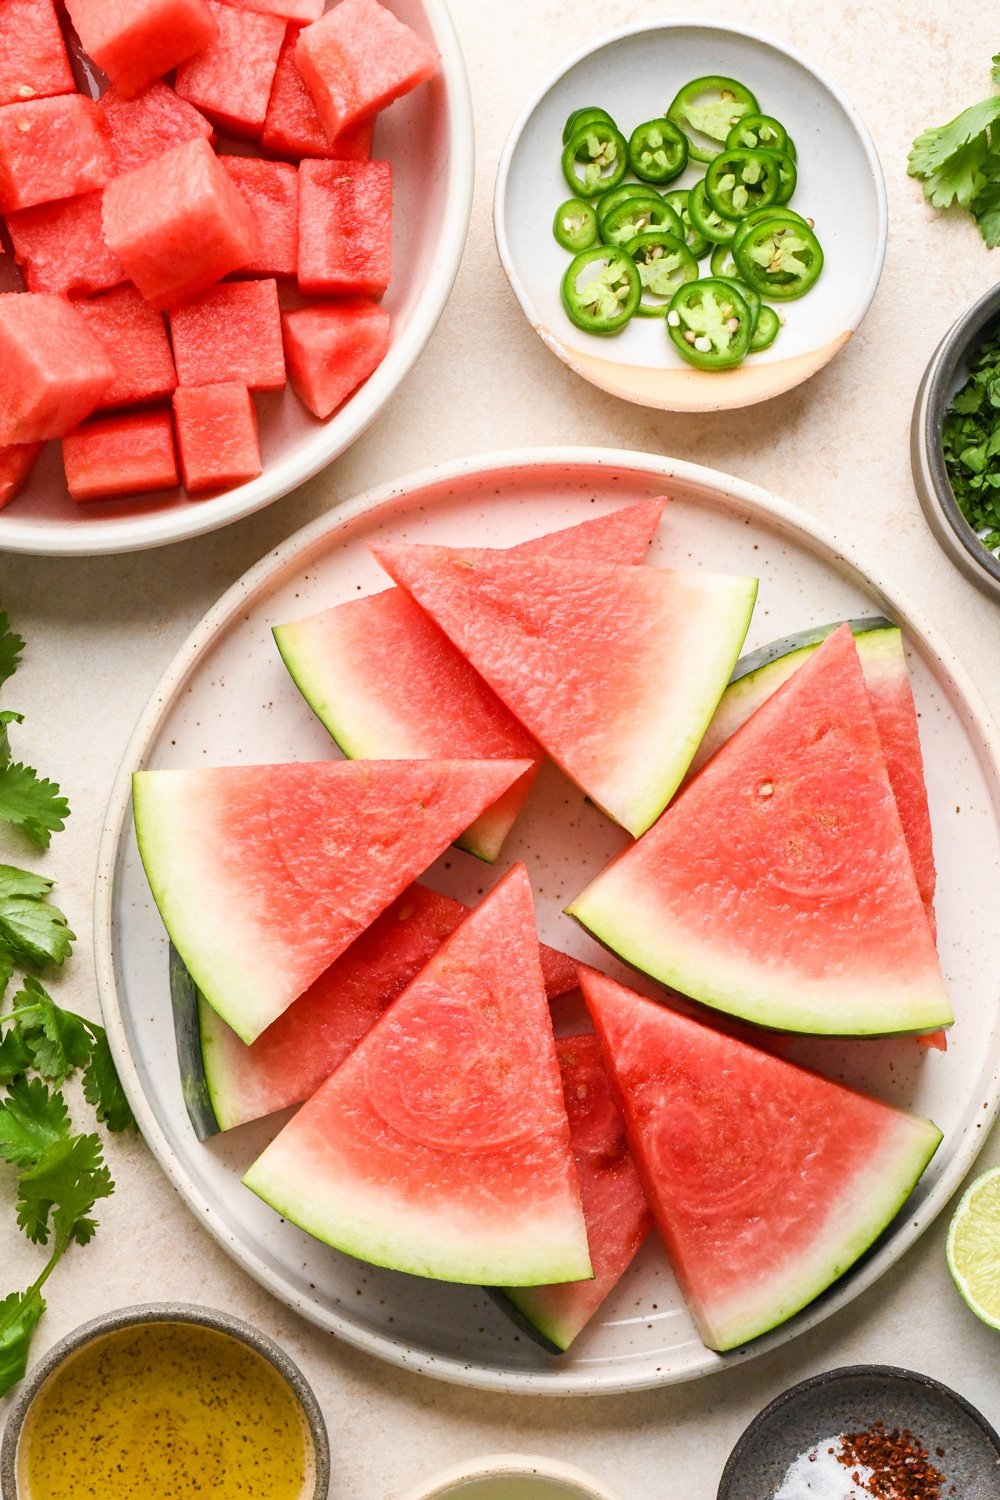 How to make spicy watermelon salad: Watermelon wedges on a plate and cubed watermelon in a shallow bowl.